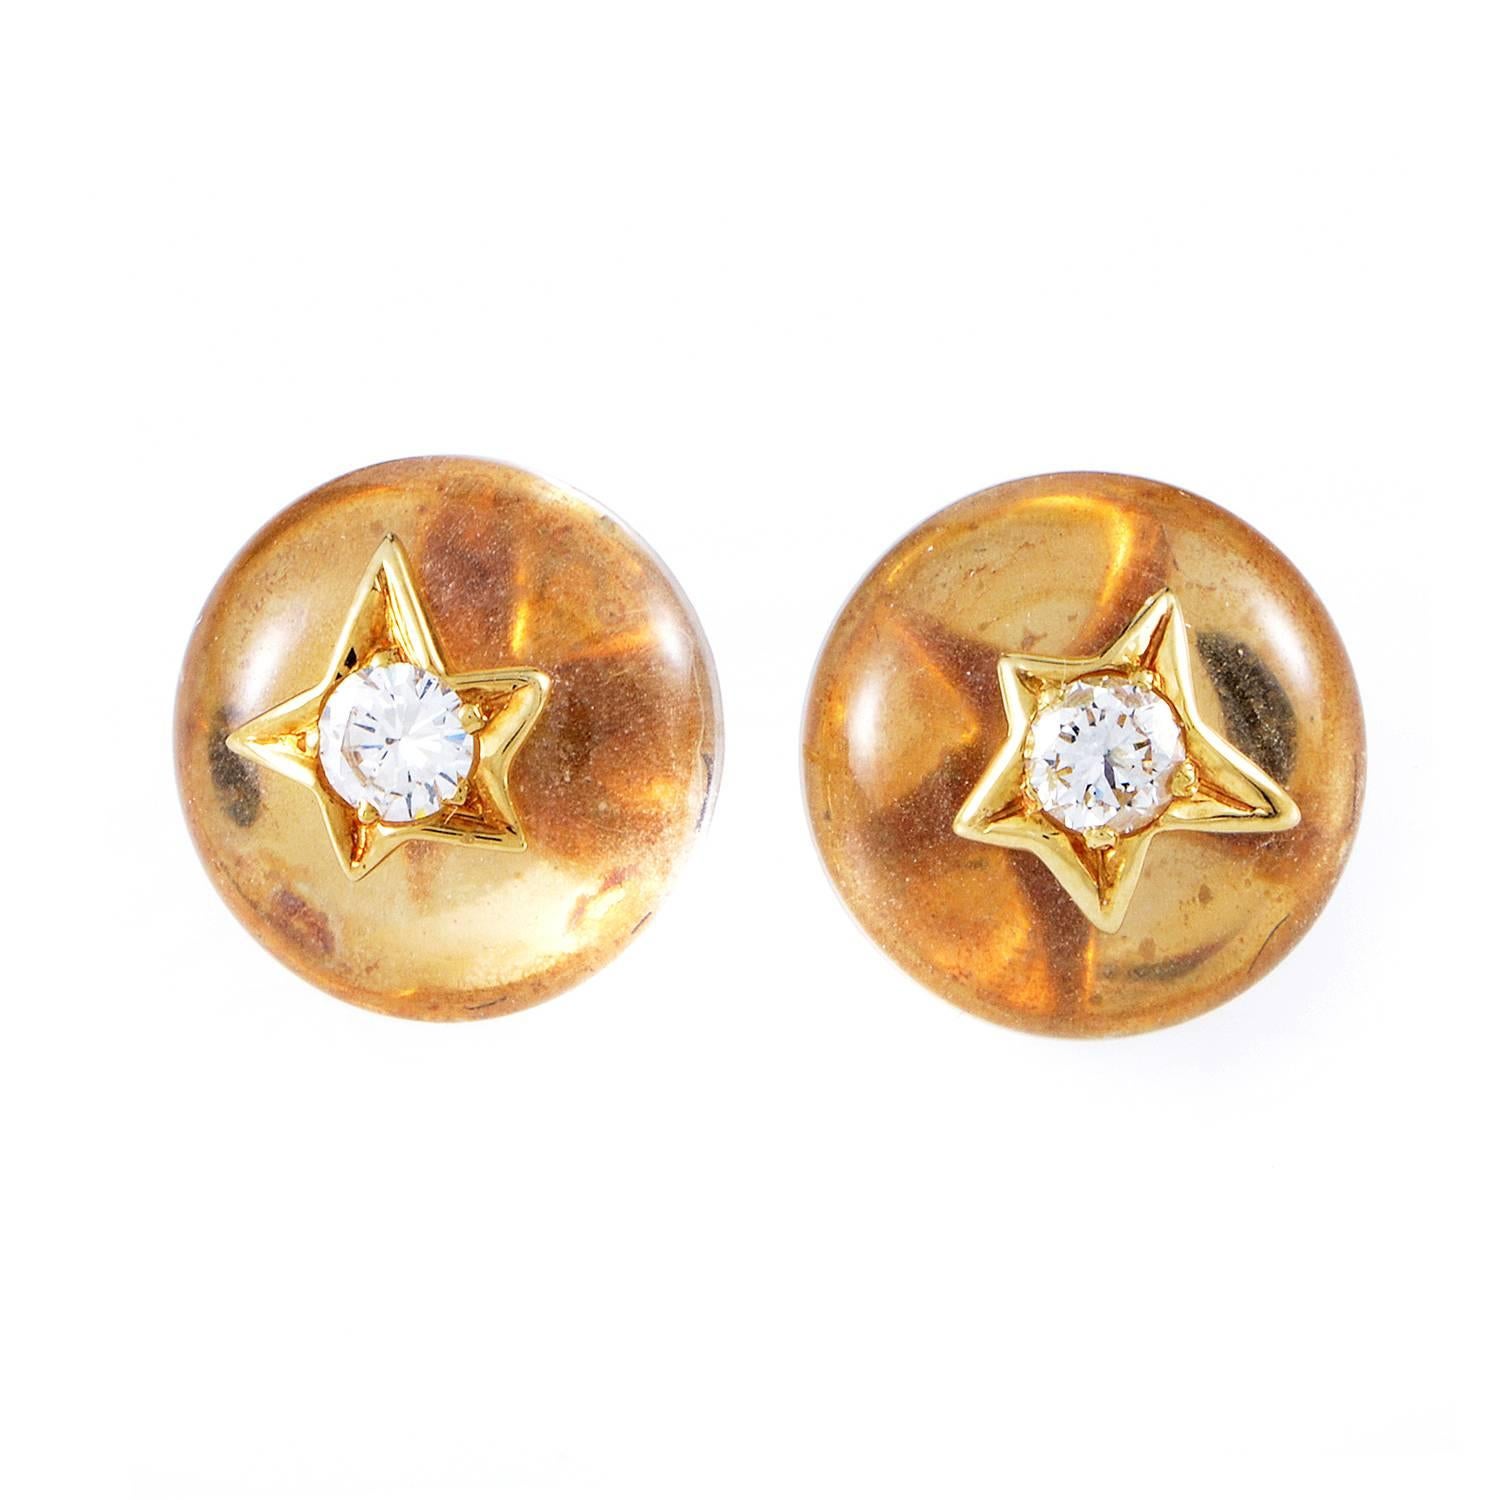 Made of 18K yellow gold and assuming an adorable shape, these splendid earrings from Chanel boast wonderful crystals and the brand's recognizable motif of a star, each embellished with a marvelous diamond, bringing the total weight to 0.20ct of